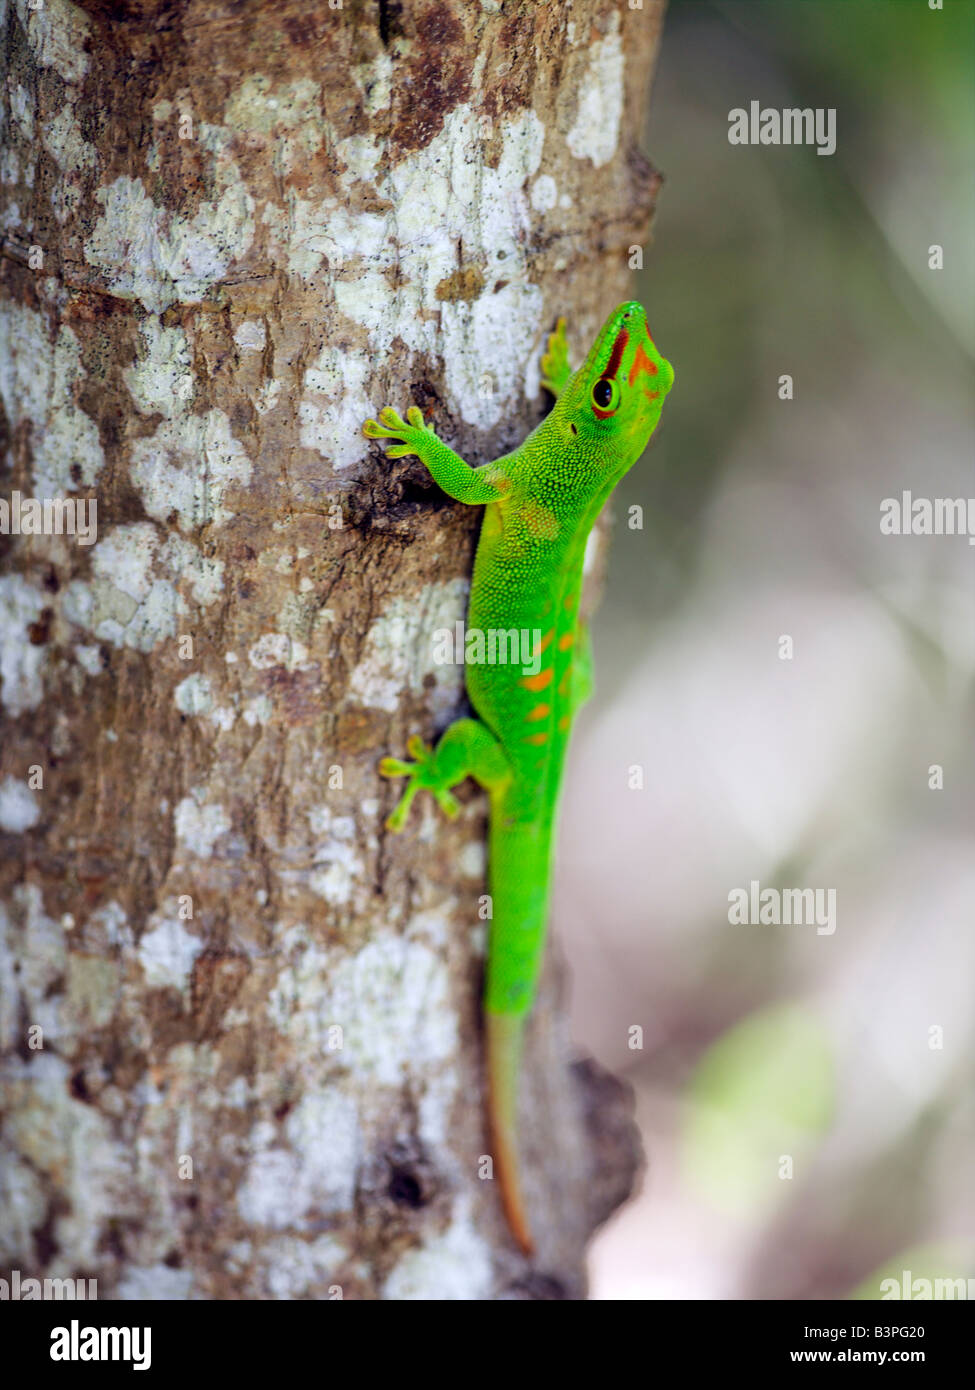 Northern Madagascar, Ankarana. A spectacular day gecko (Phelsuma madagascariensis grandis) is one of roughly 70 gecko species in Madagascar. It is the largest (up to 30 cm long) in northern Madagascar with the brightest colours. Geckoes outnumber all other lizard species on the island. Stock Photo